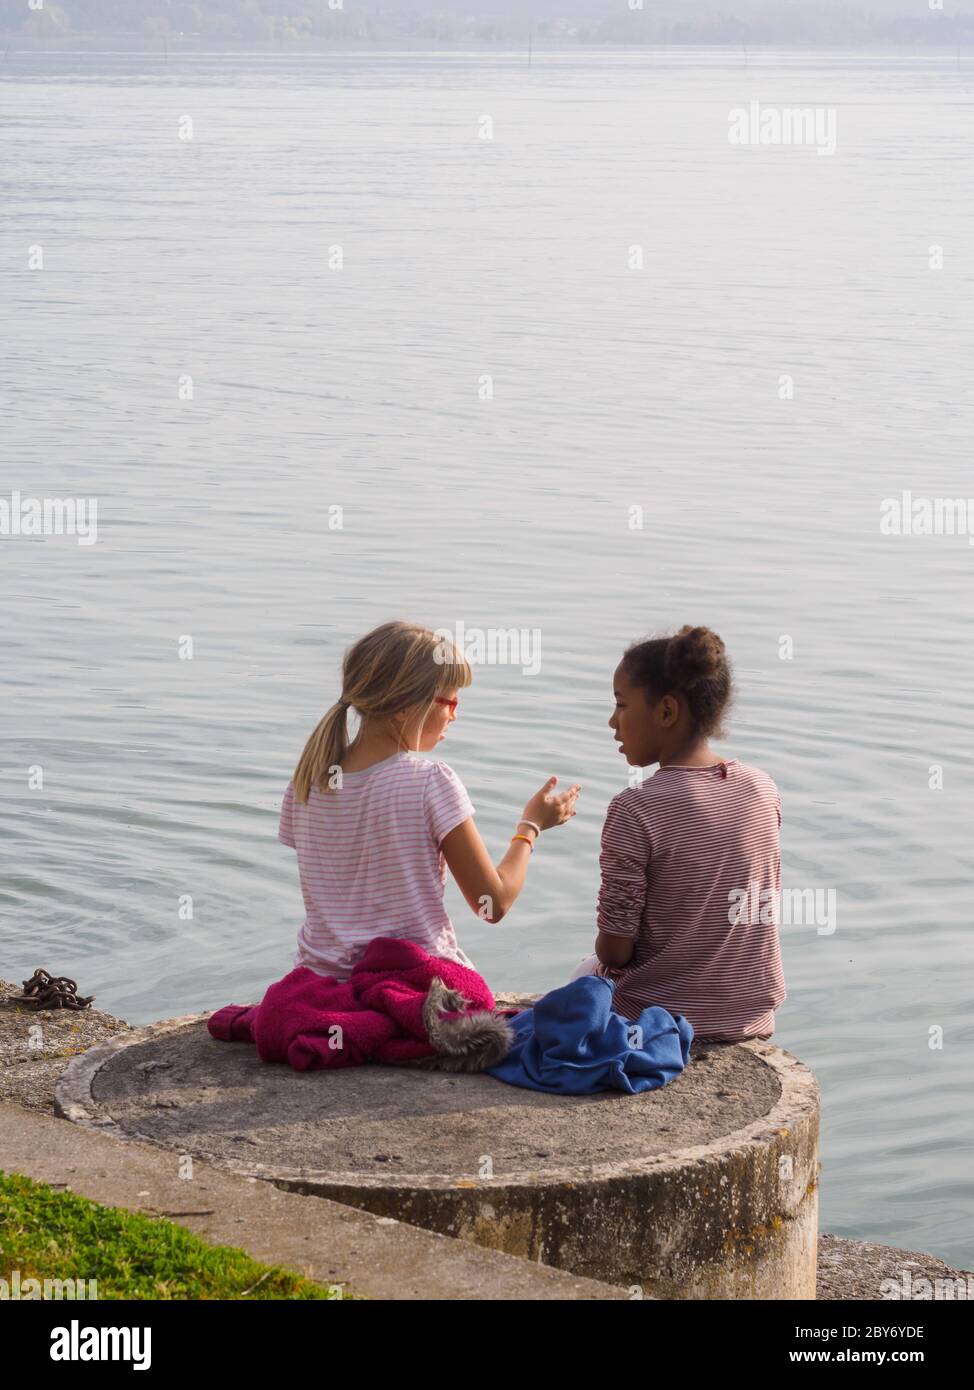 Two little girls, one blonde and the other black, sit on the edge of a lake in Italy and talk to each other... Stock Photo